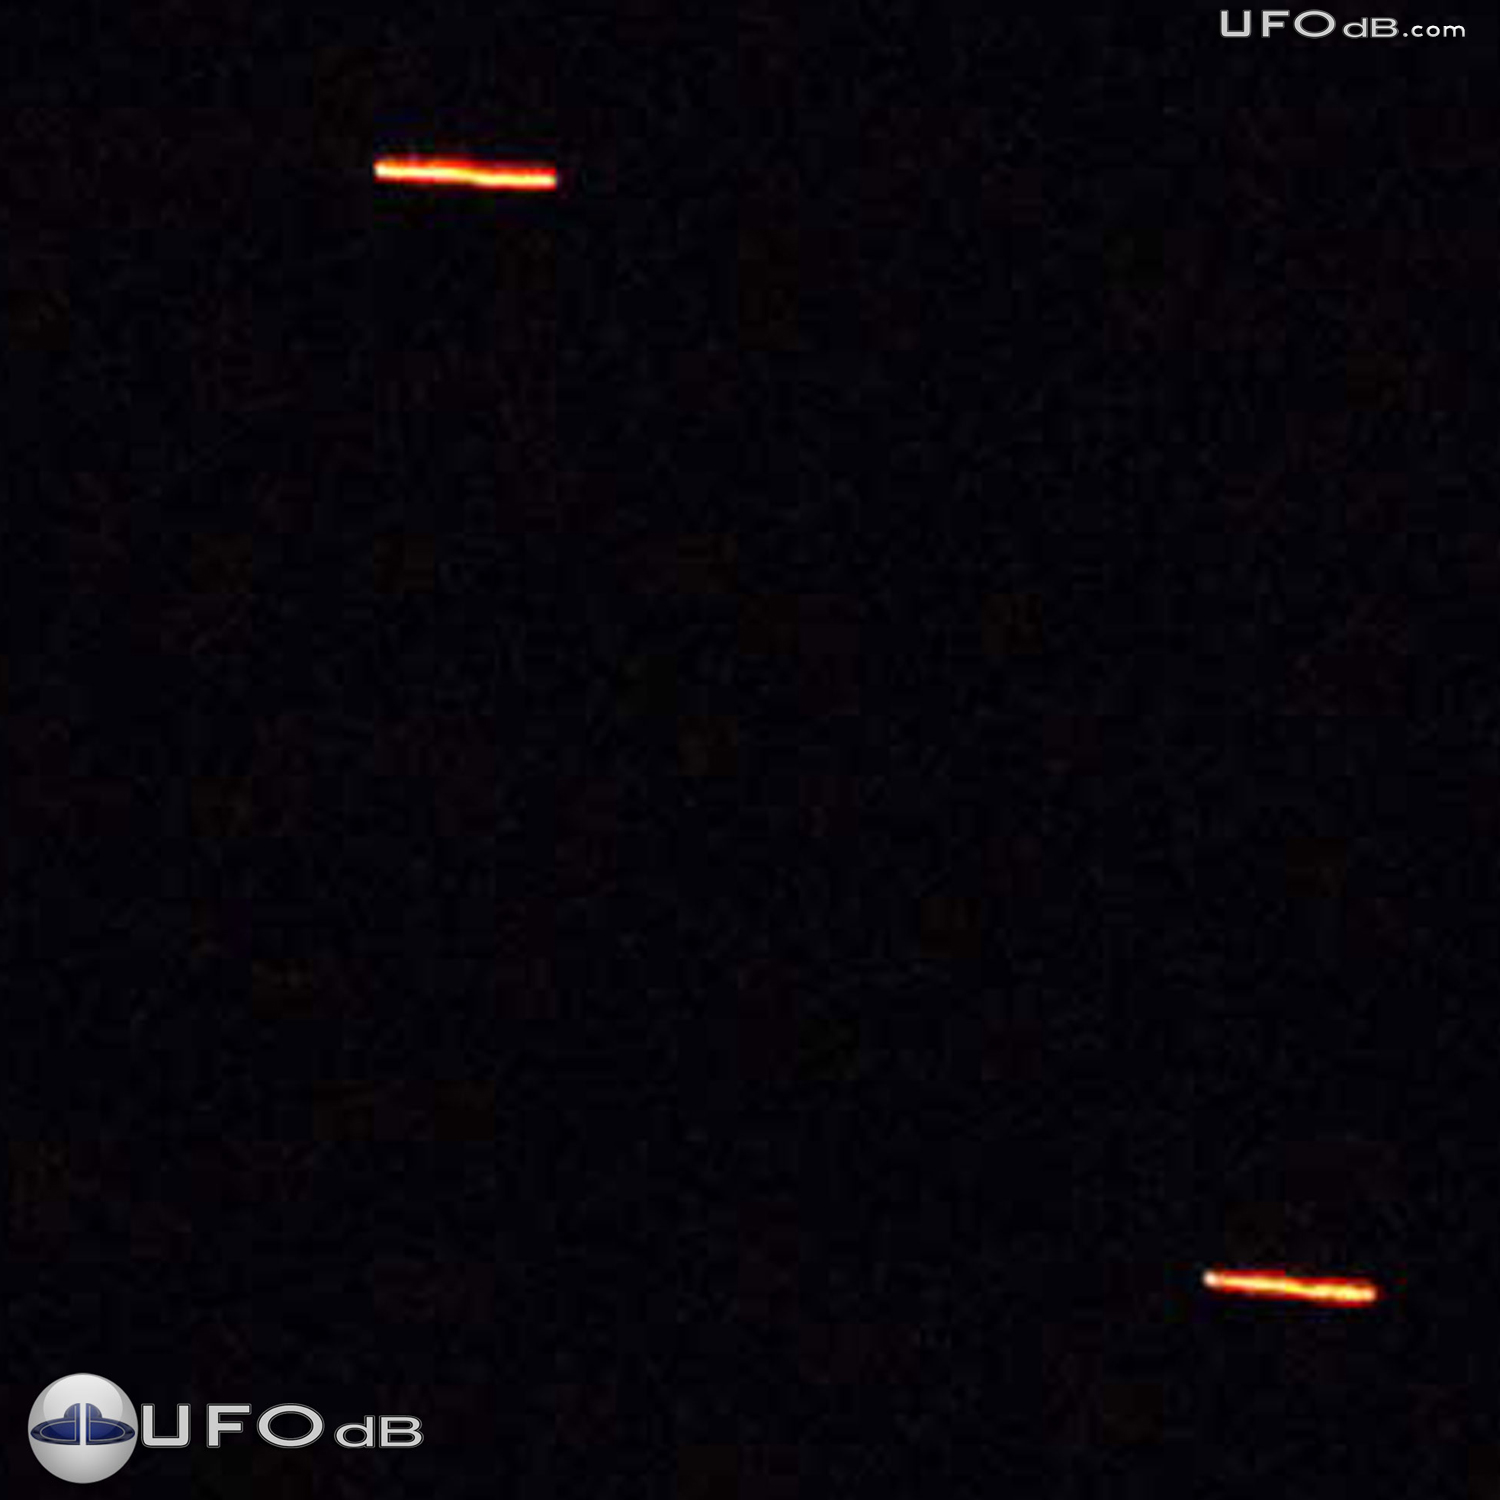 Two orbs UFO over Agimak Lake near Ignace in Ontario Canada, July 2011 UFO Picture #357-1